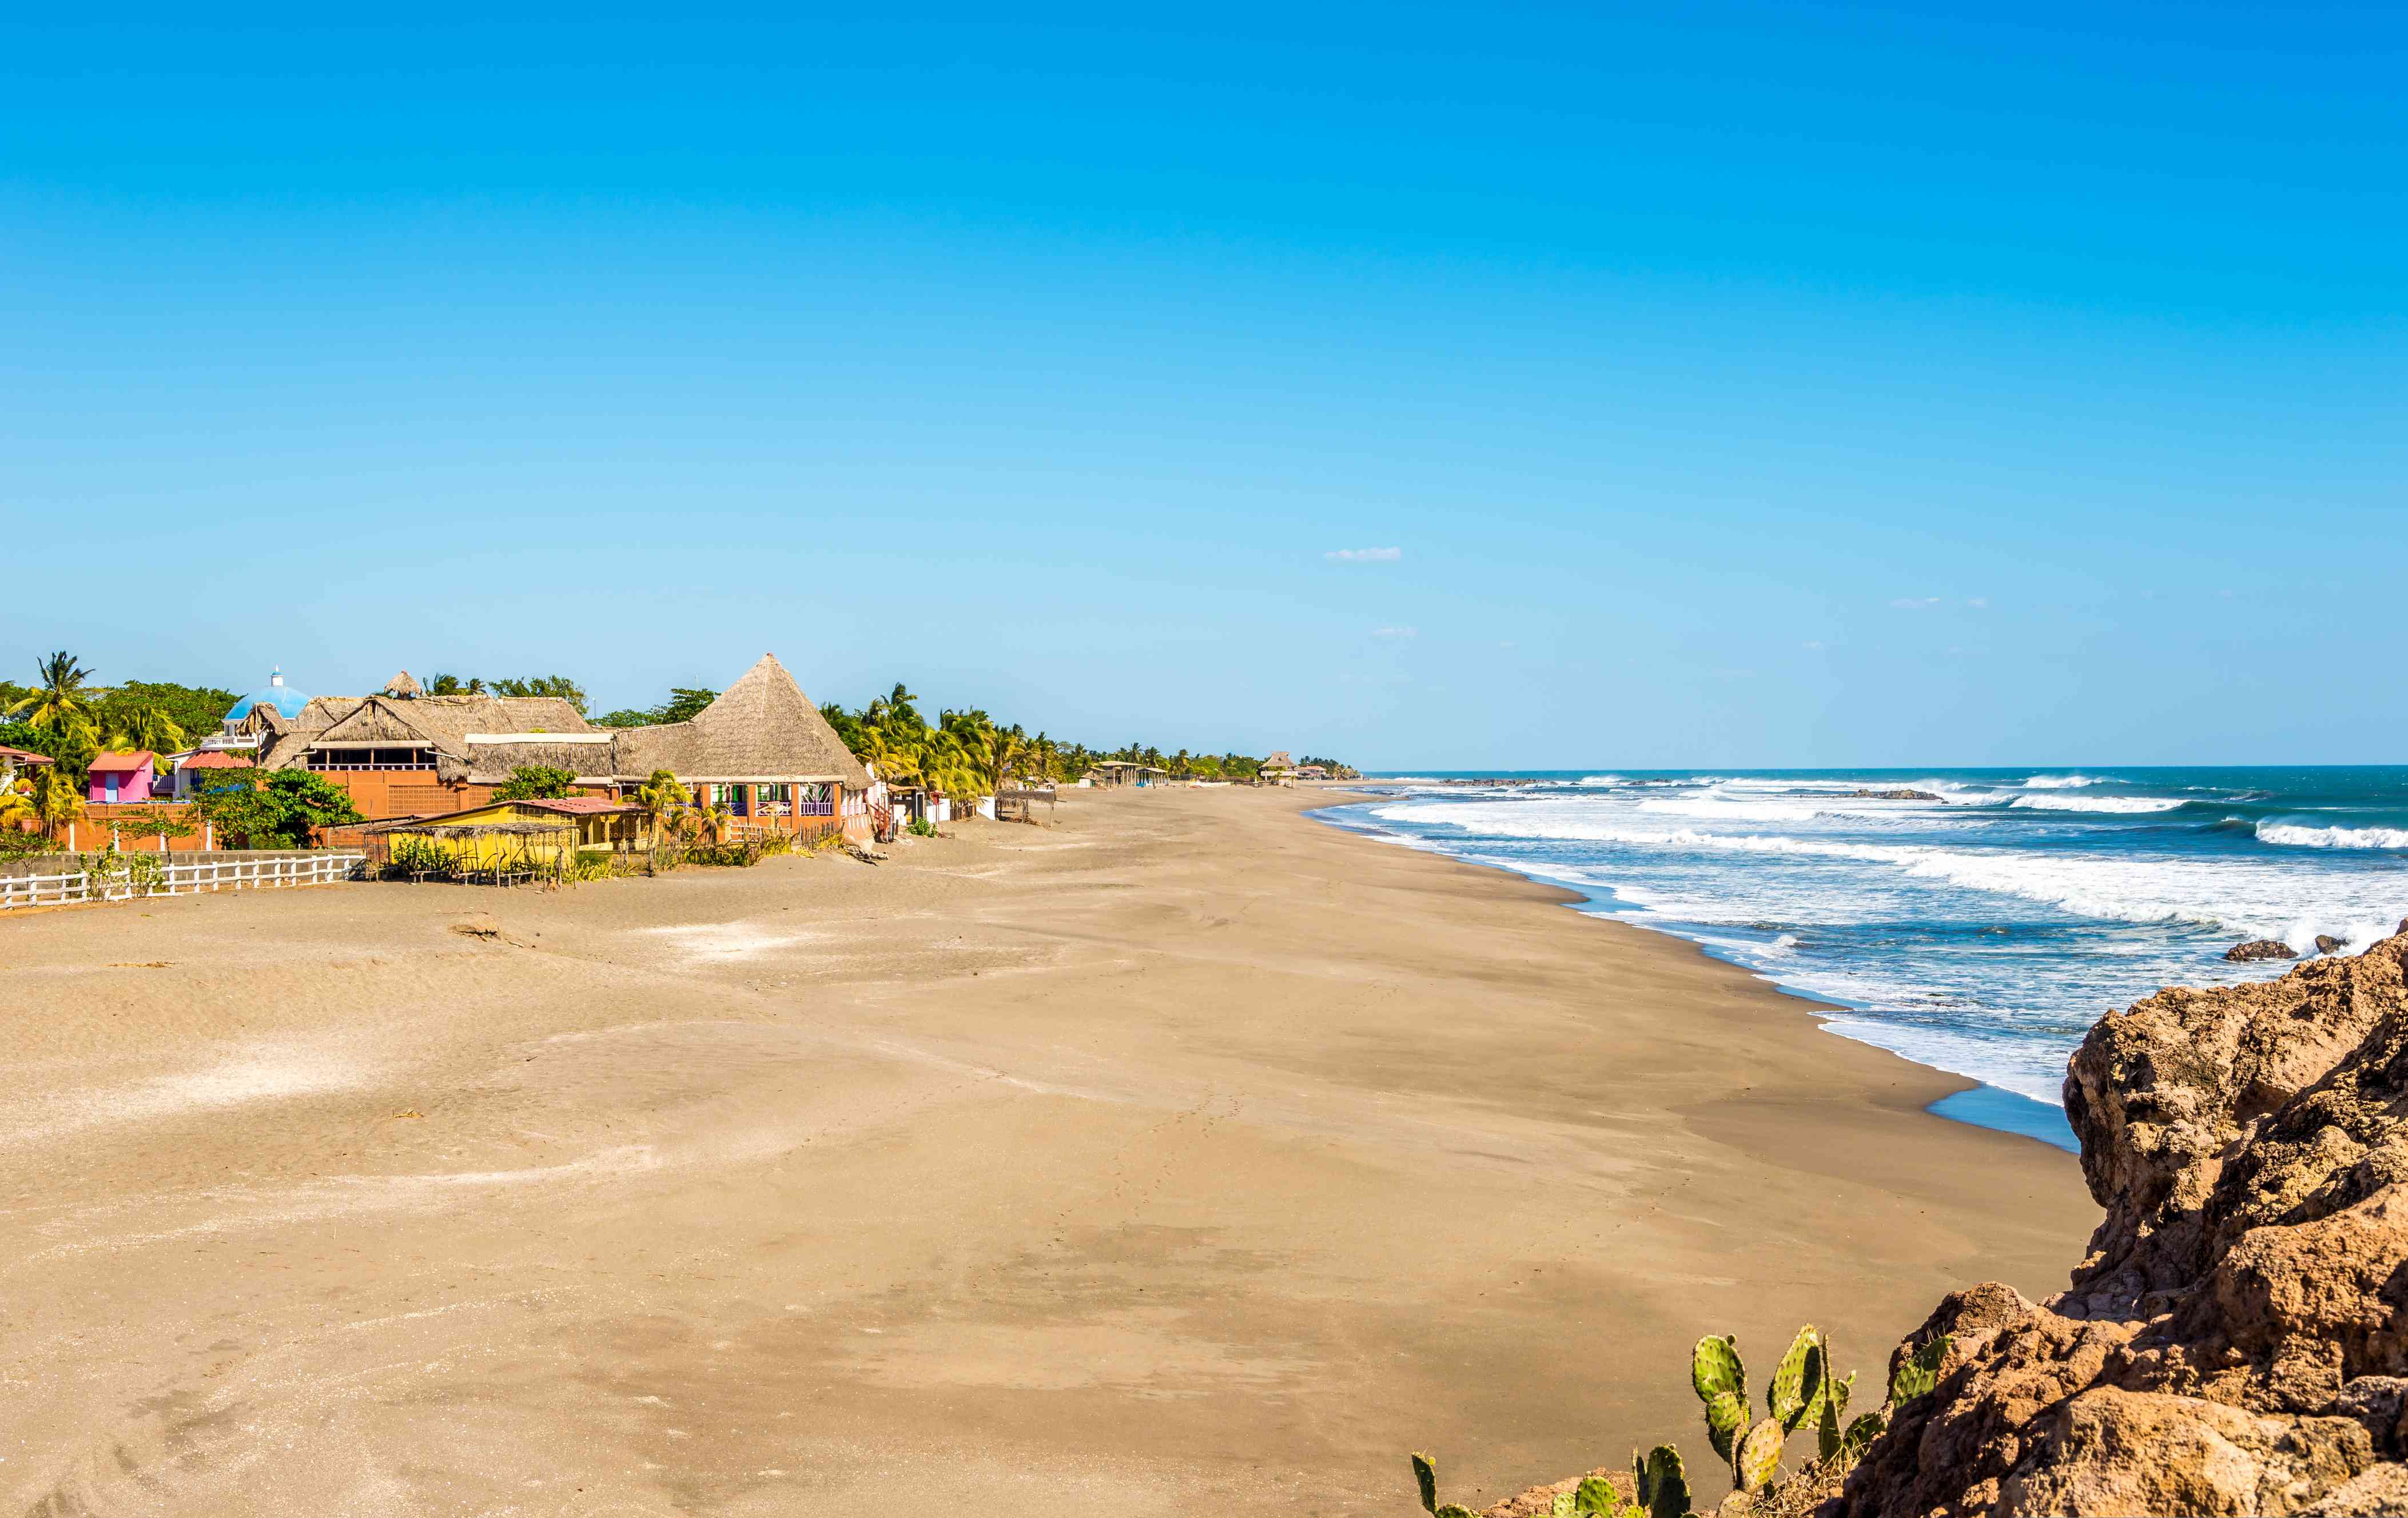 PONELOYA (Le Nord-Ouest / Nicaragua)